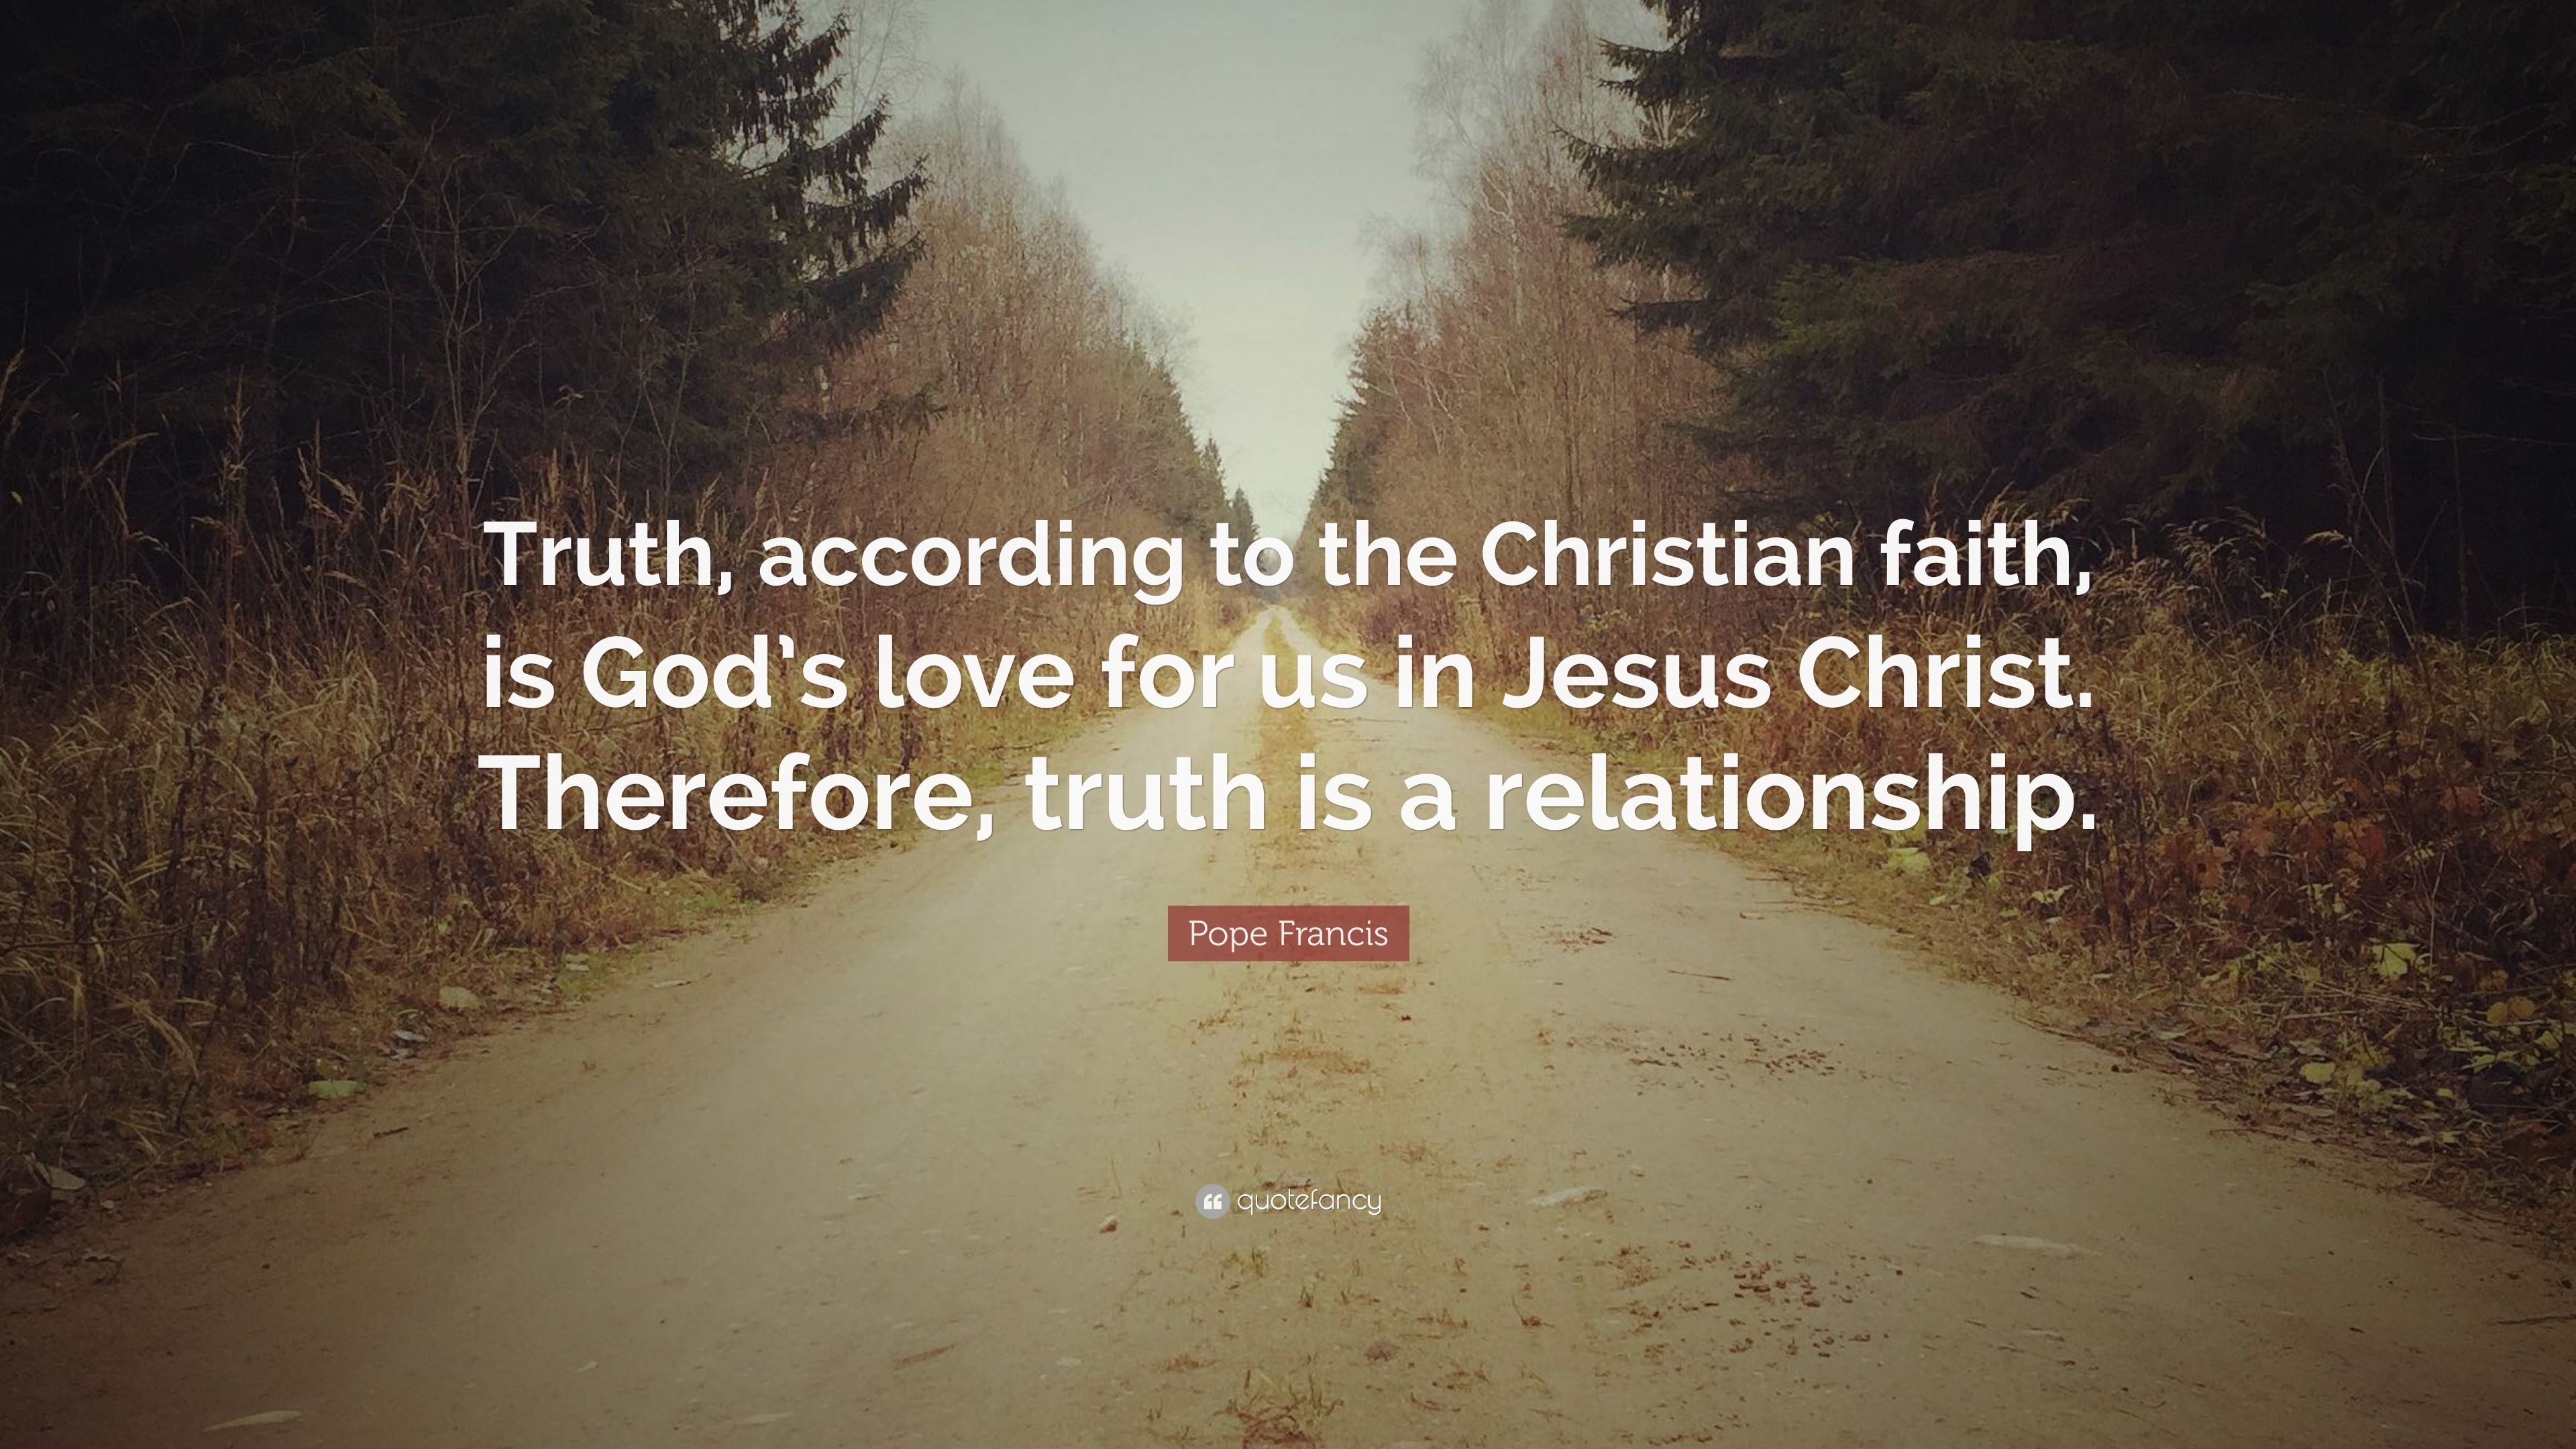 483111 Pope Francis Quote Truth according to the Christian faith is God s